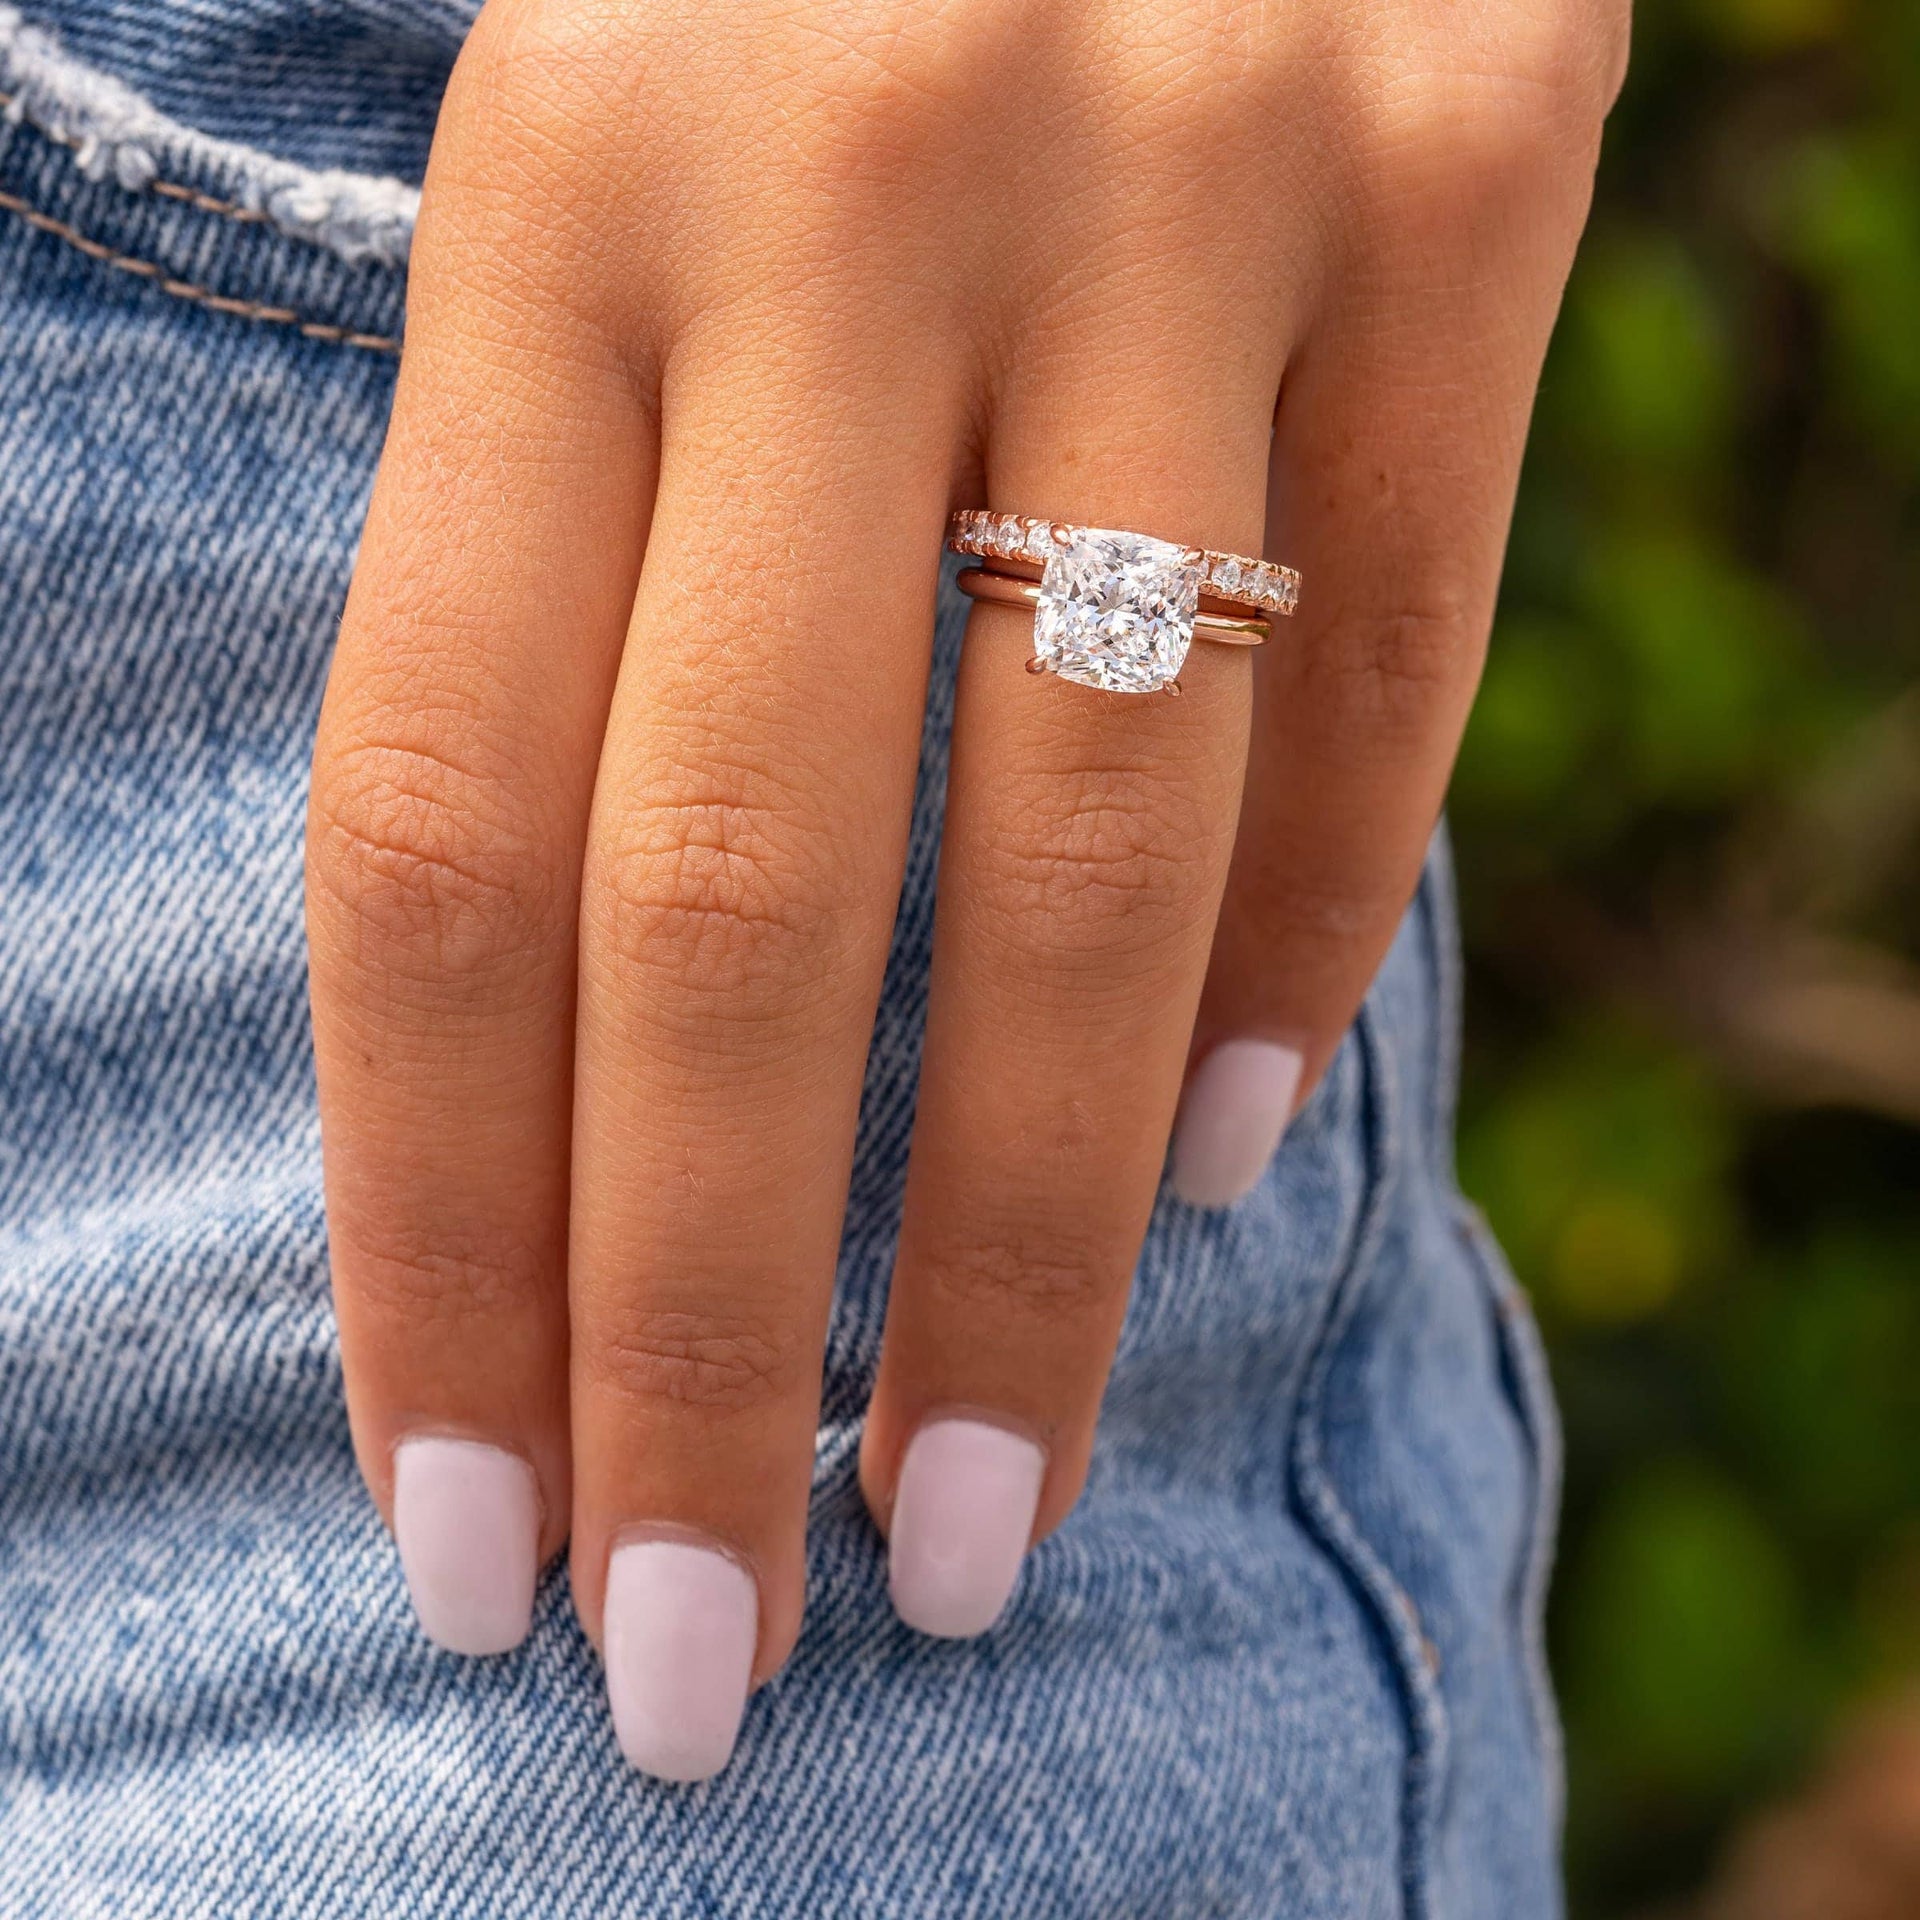 The Claire Rose Gold - Cushion Cut Solitare Engagement Ring